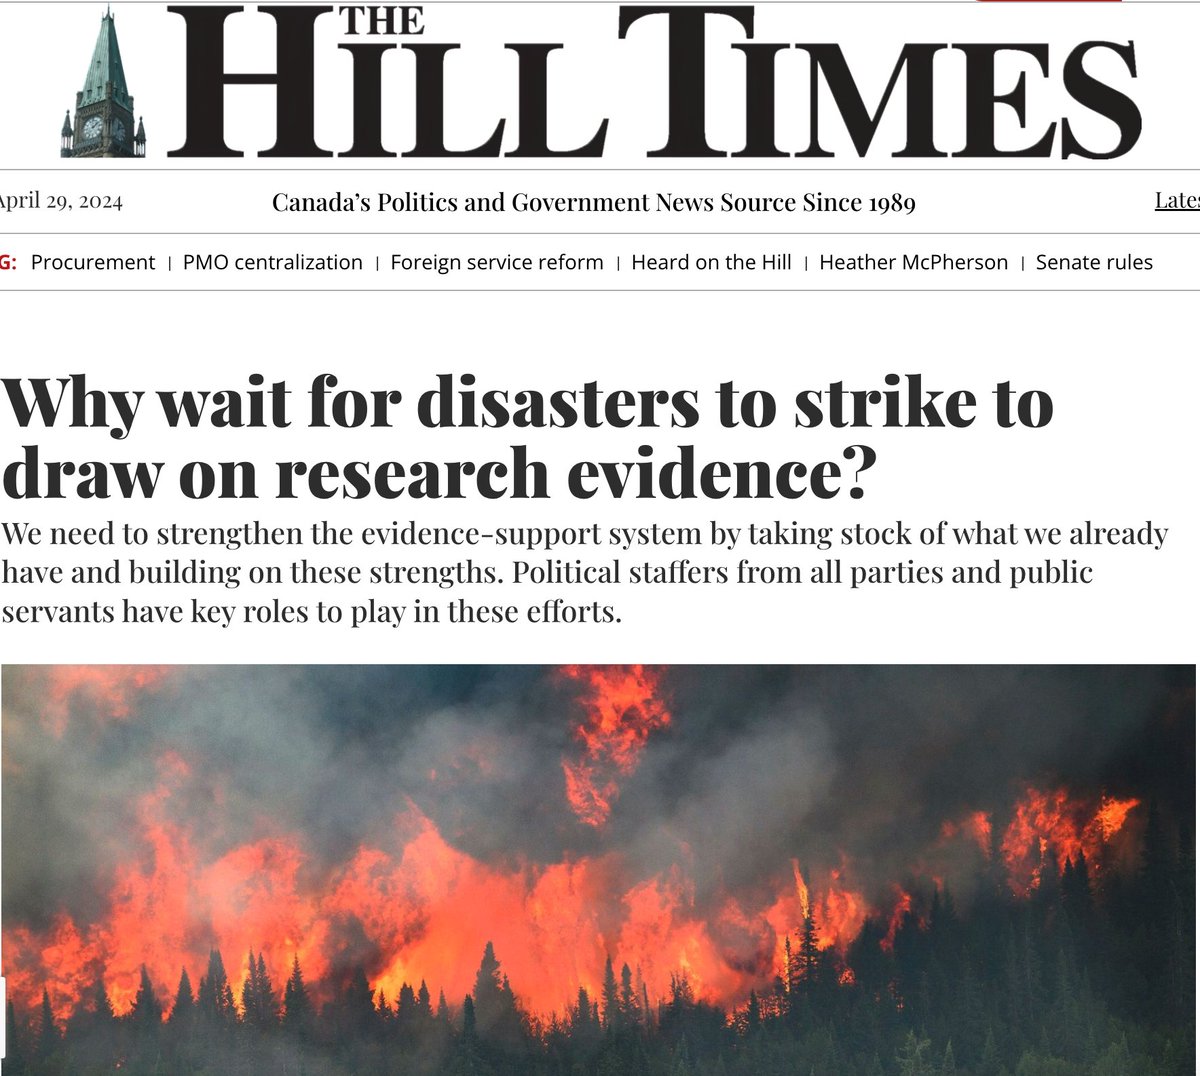 With the country engulfed in wildfires last year, governments turned to evidence for how to protect the health of communities, but how can we make it the norm? @Lavisjn & Kerry Waddell share insights in this article from @TheHillTimes buff.ly/3Jfg9hc #cdnpoli 🧵 1/7